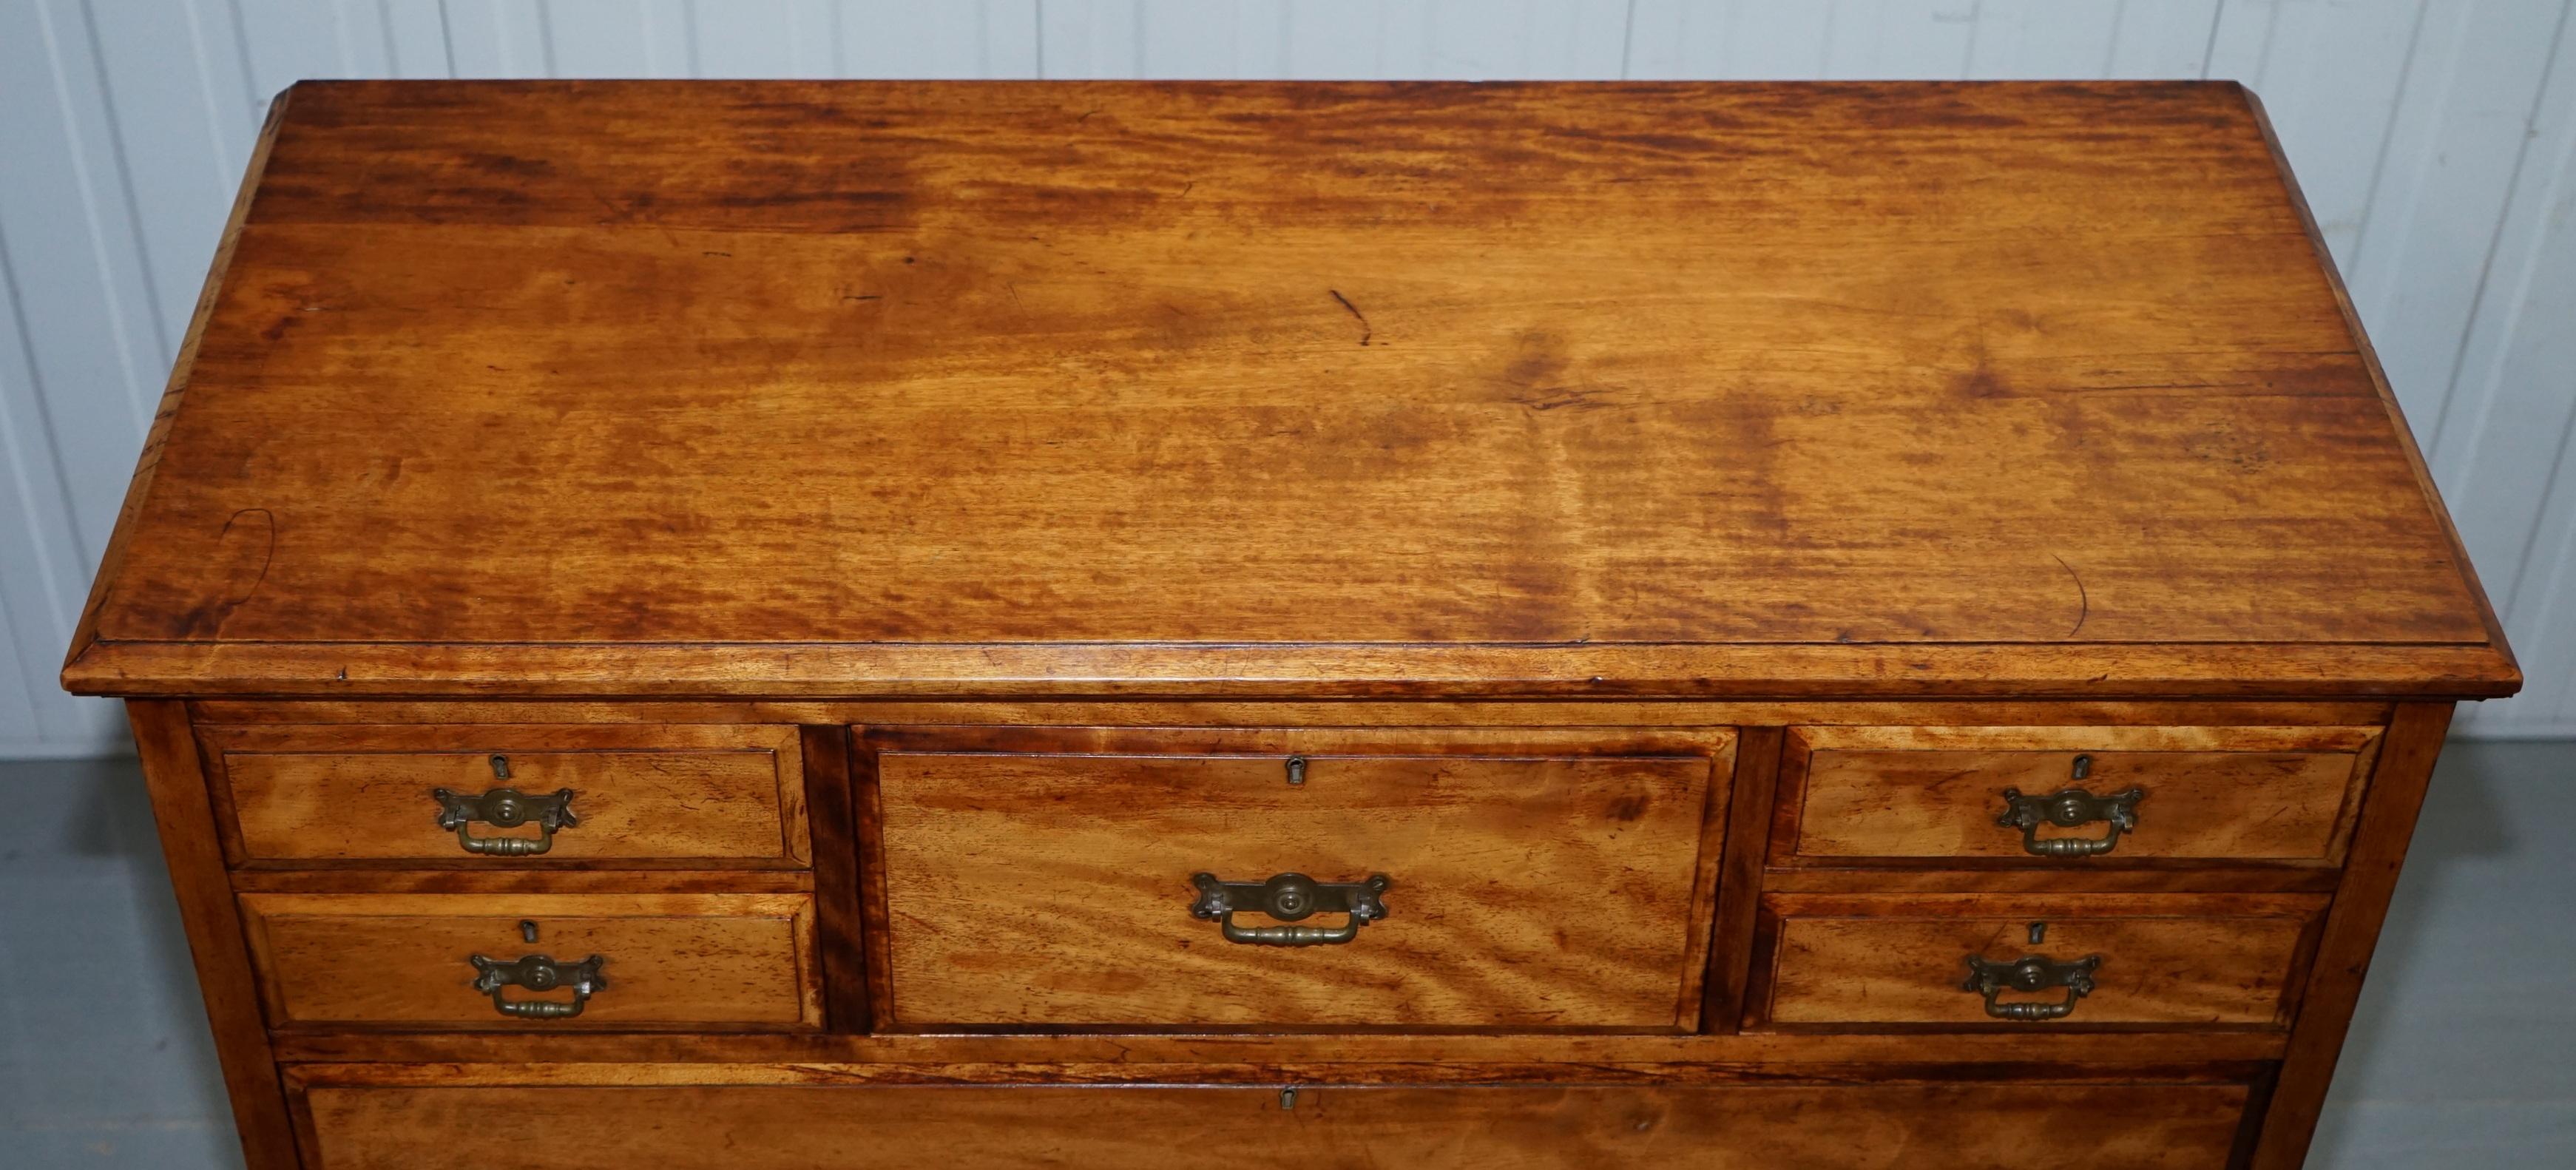 chest of drawers with locks